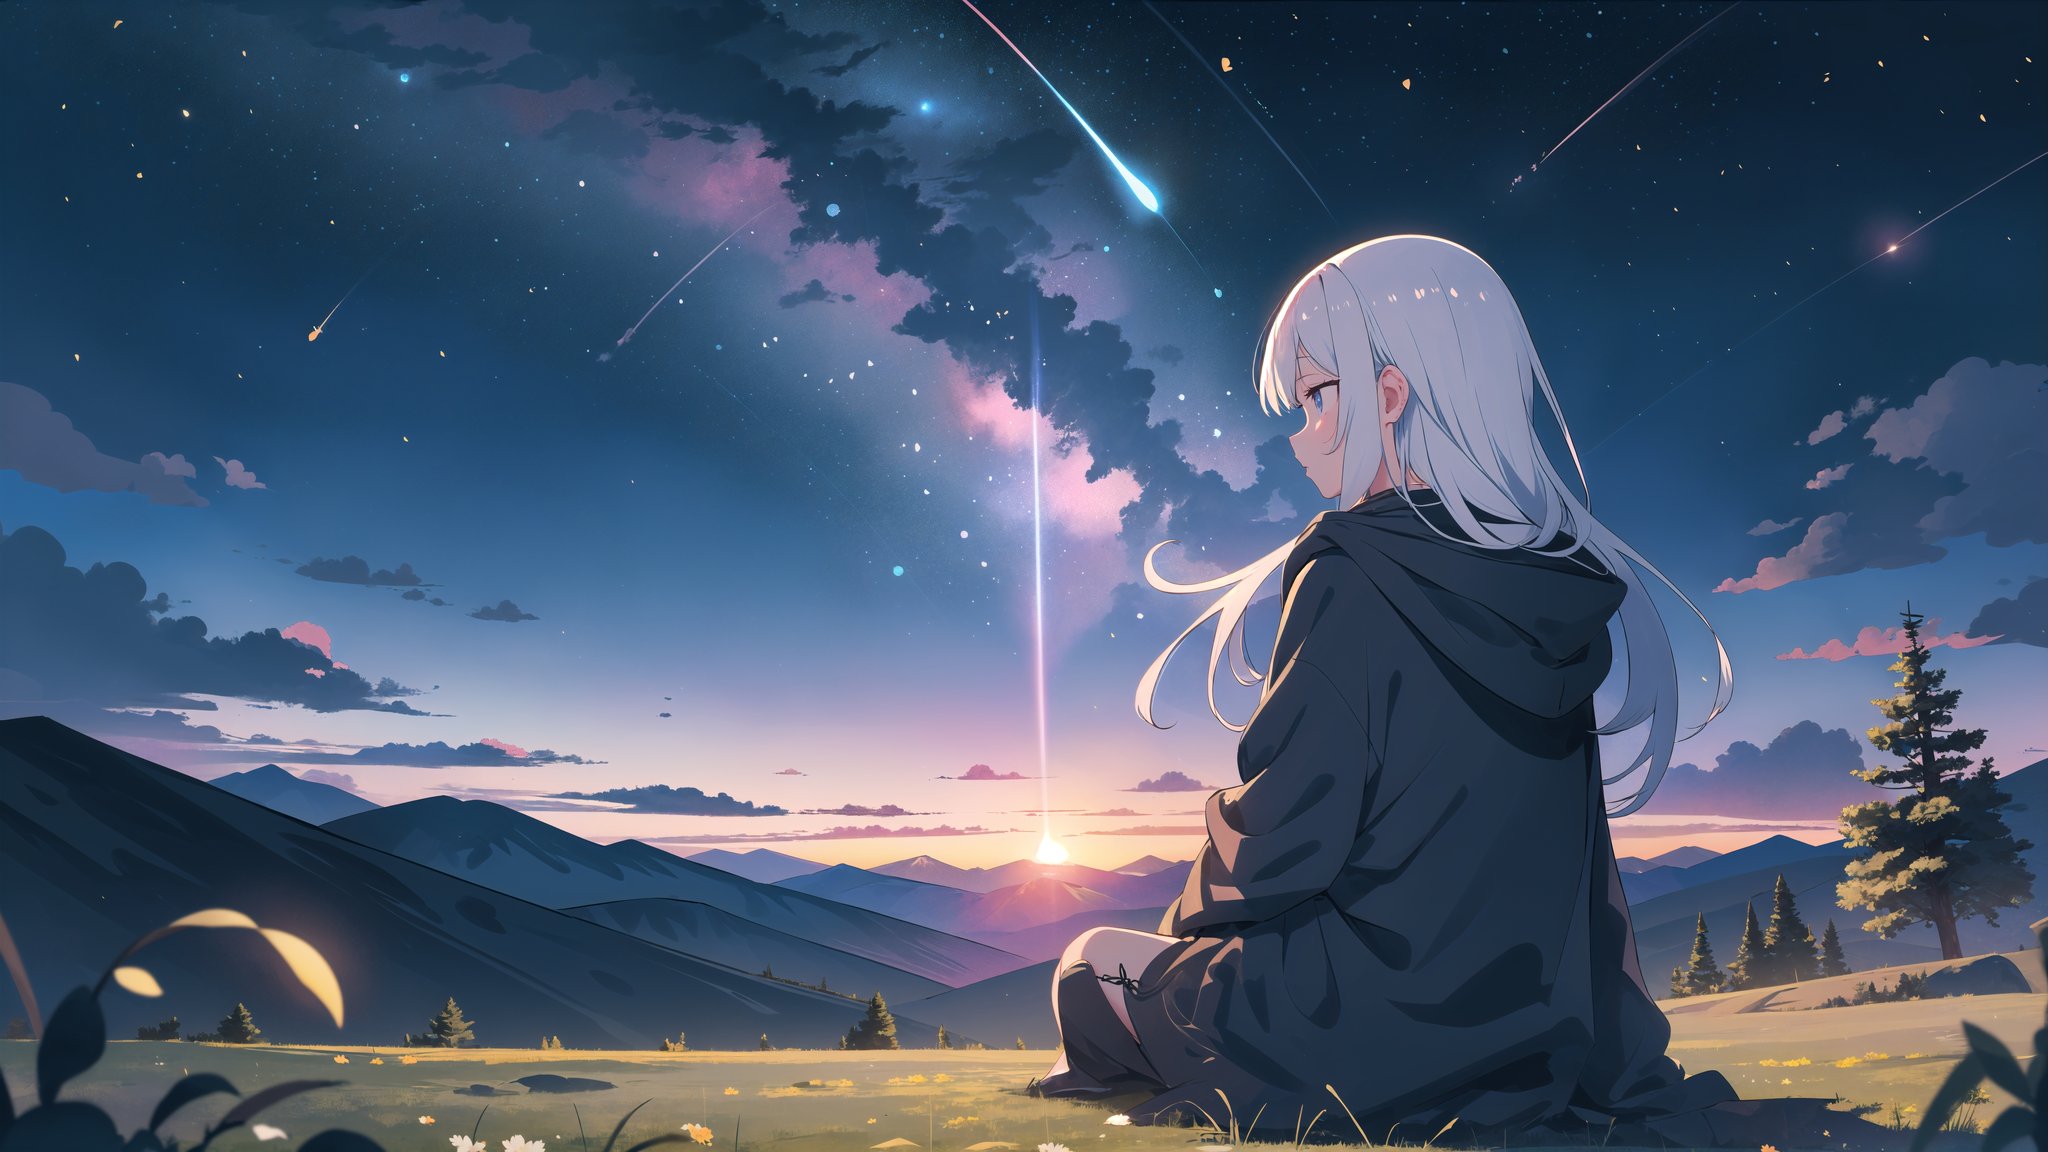 (masterpiece, best quality, highres:1.3), ultra resolution image, (solo), (1girl), (very long hair, silver hair), outdoors, starry sky, (scenery:1.2), milky way, night, star trail, cloud, mountain, night sky, black hooded robe, silhouette, (from behind:1.2), girl looking sky, extremely detailed CG unity 8k wallpaper, moon, dramatic lighting, light particles, girl sitting on ground, mountainous horizon, sunset, field,